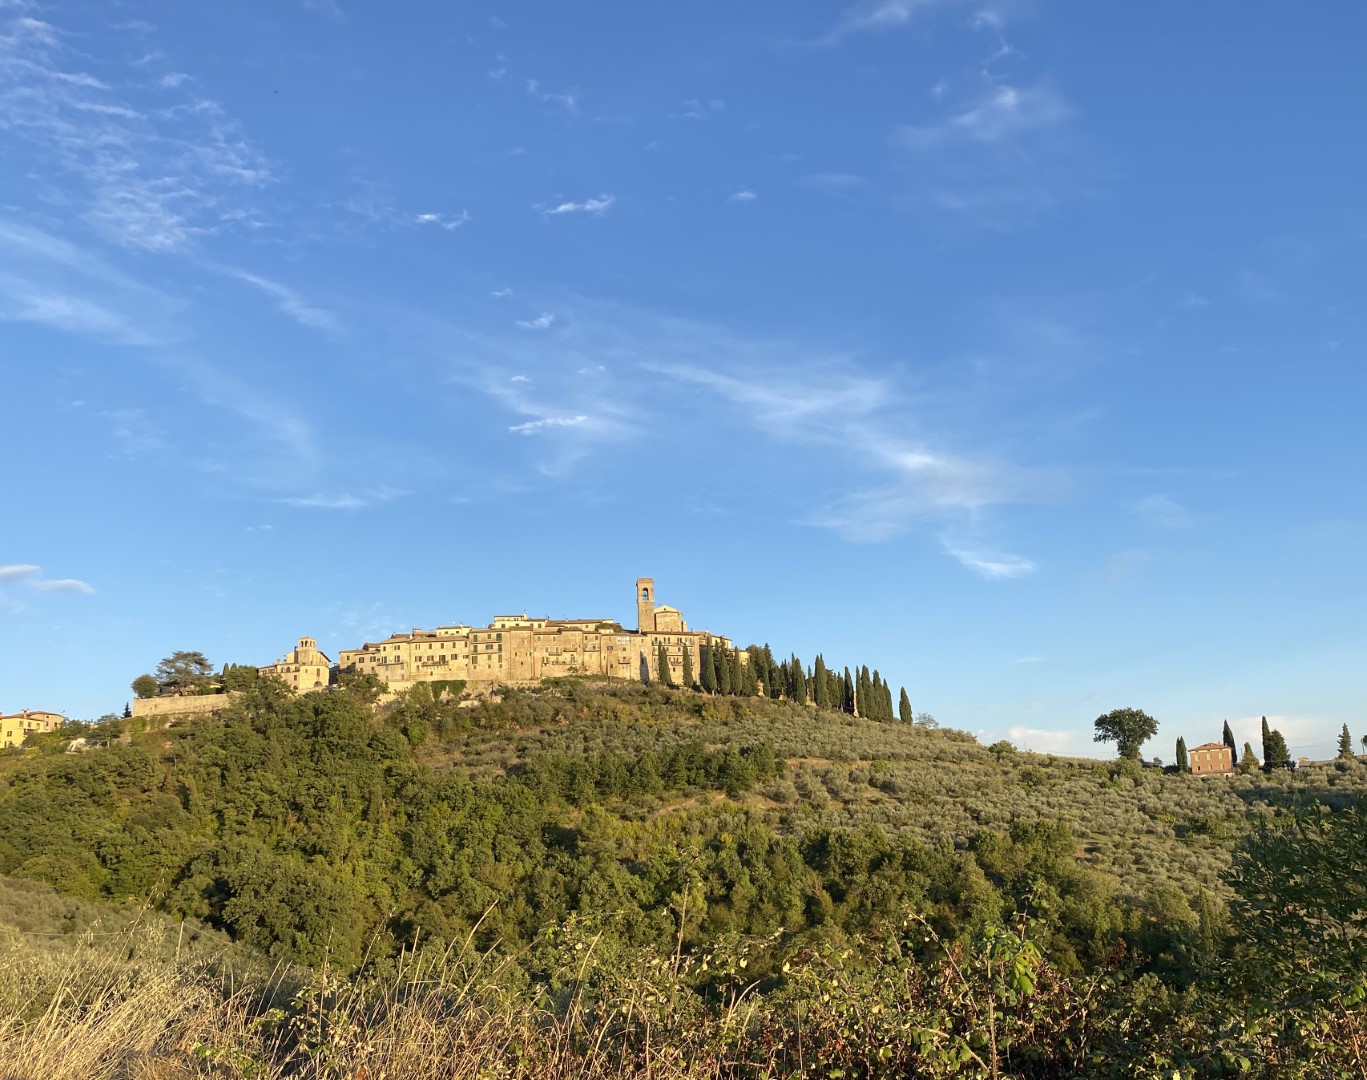 An easy ride on the hill of Gualdo Cattaneo